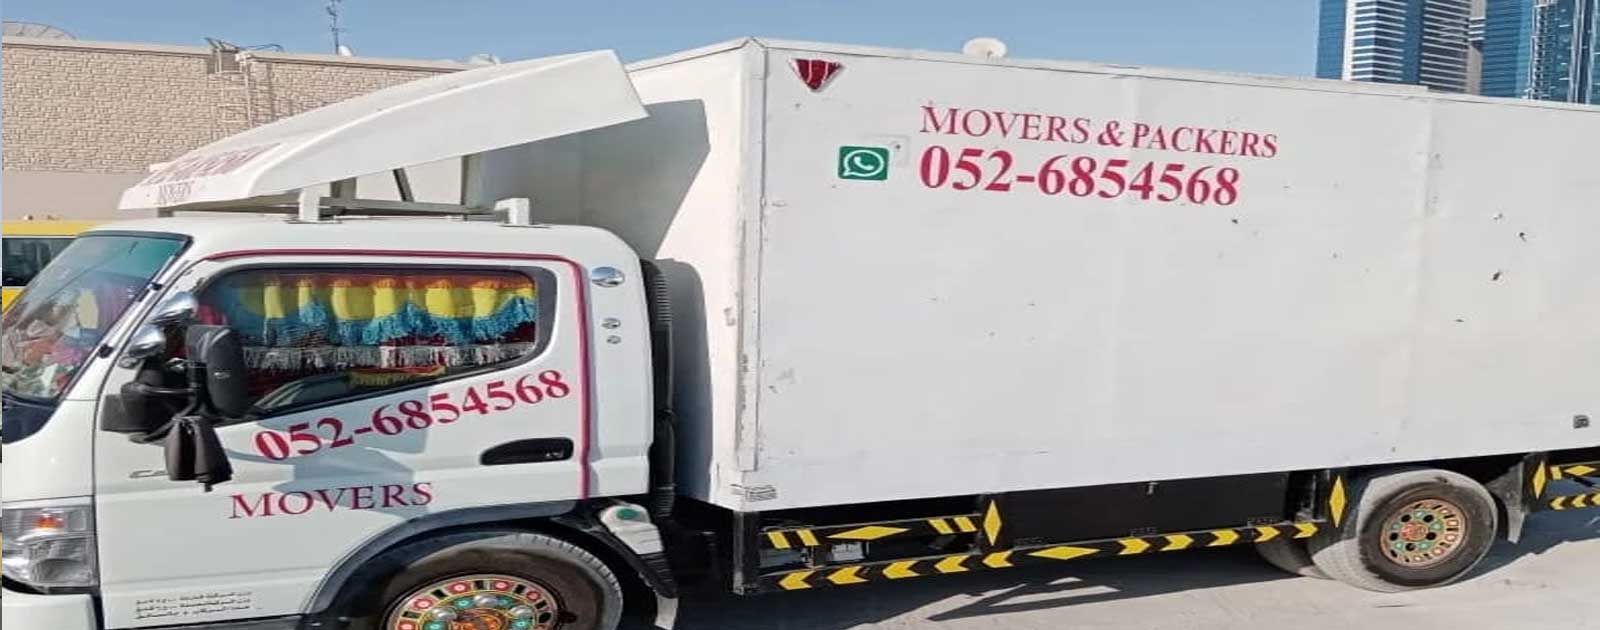 Shah Movers